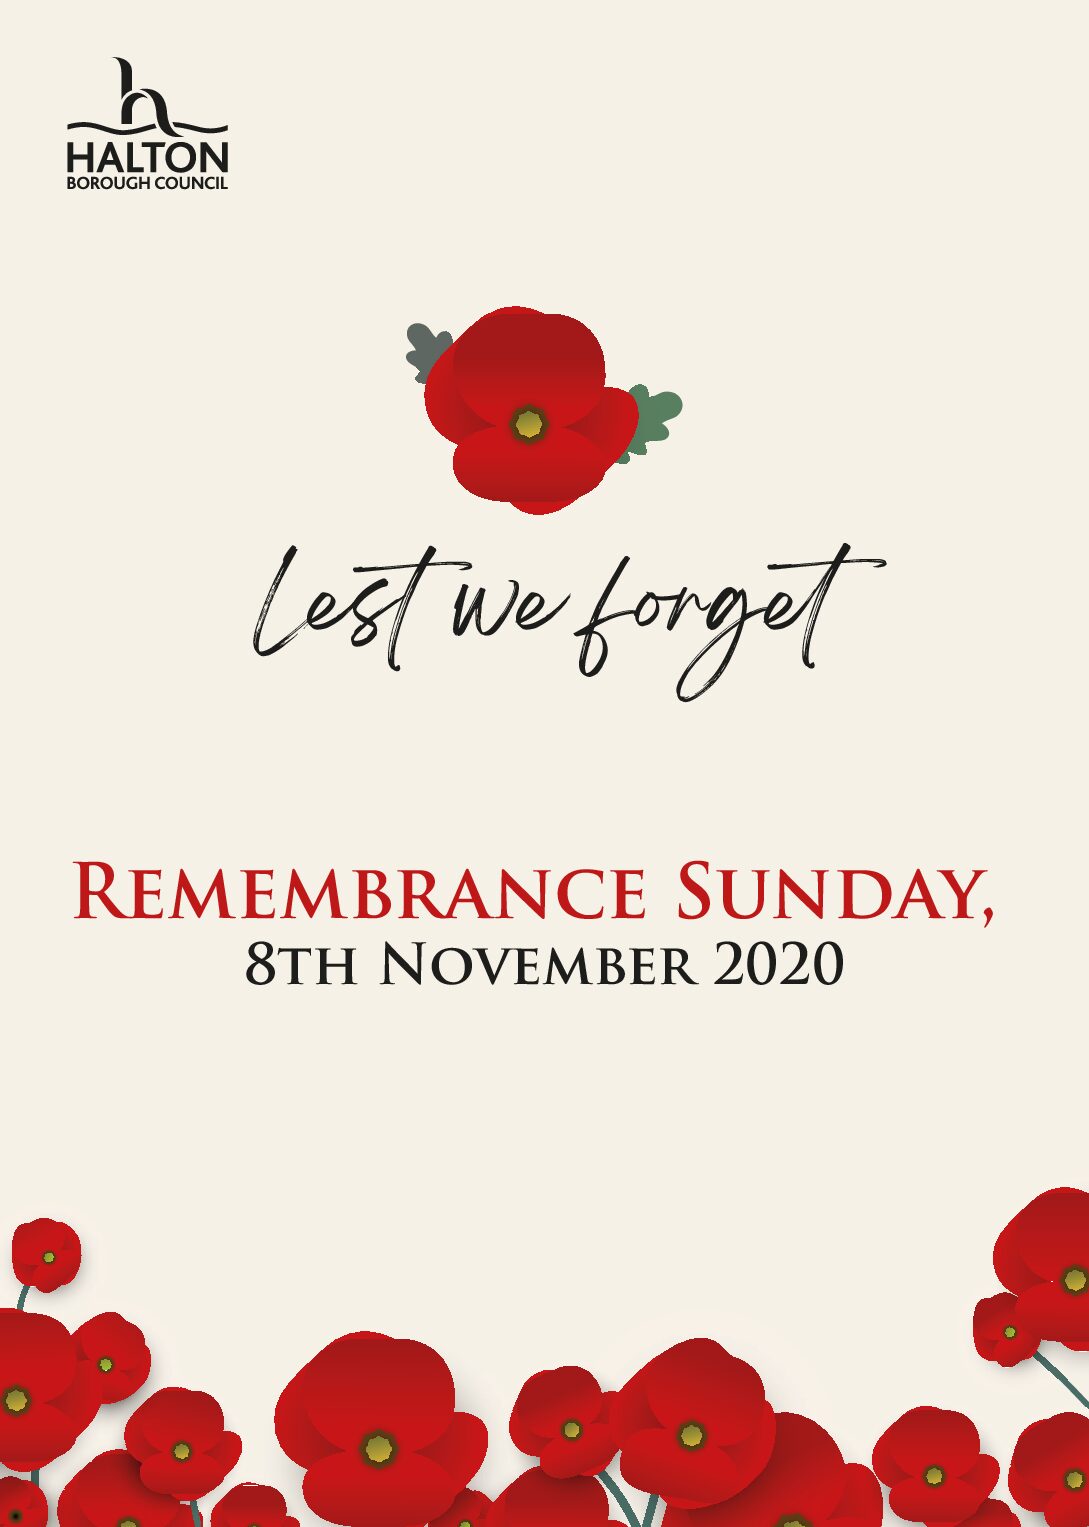 Please pay your respects from home on Remembrance Sunday